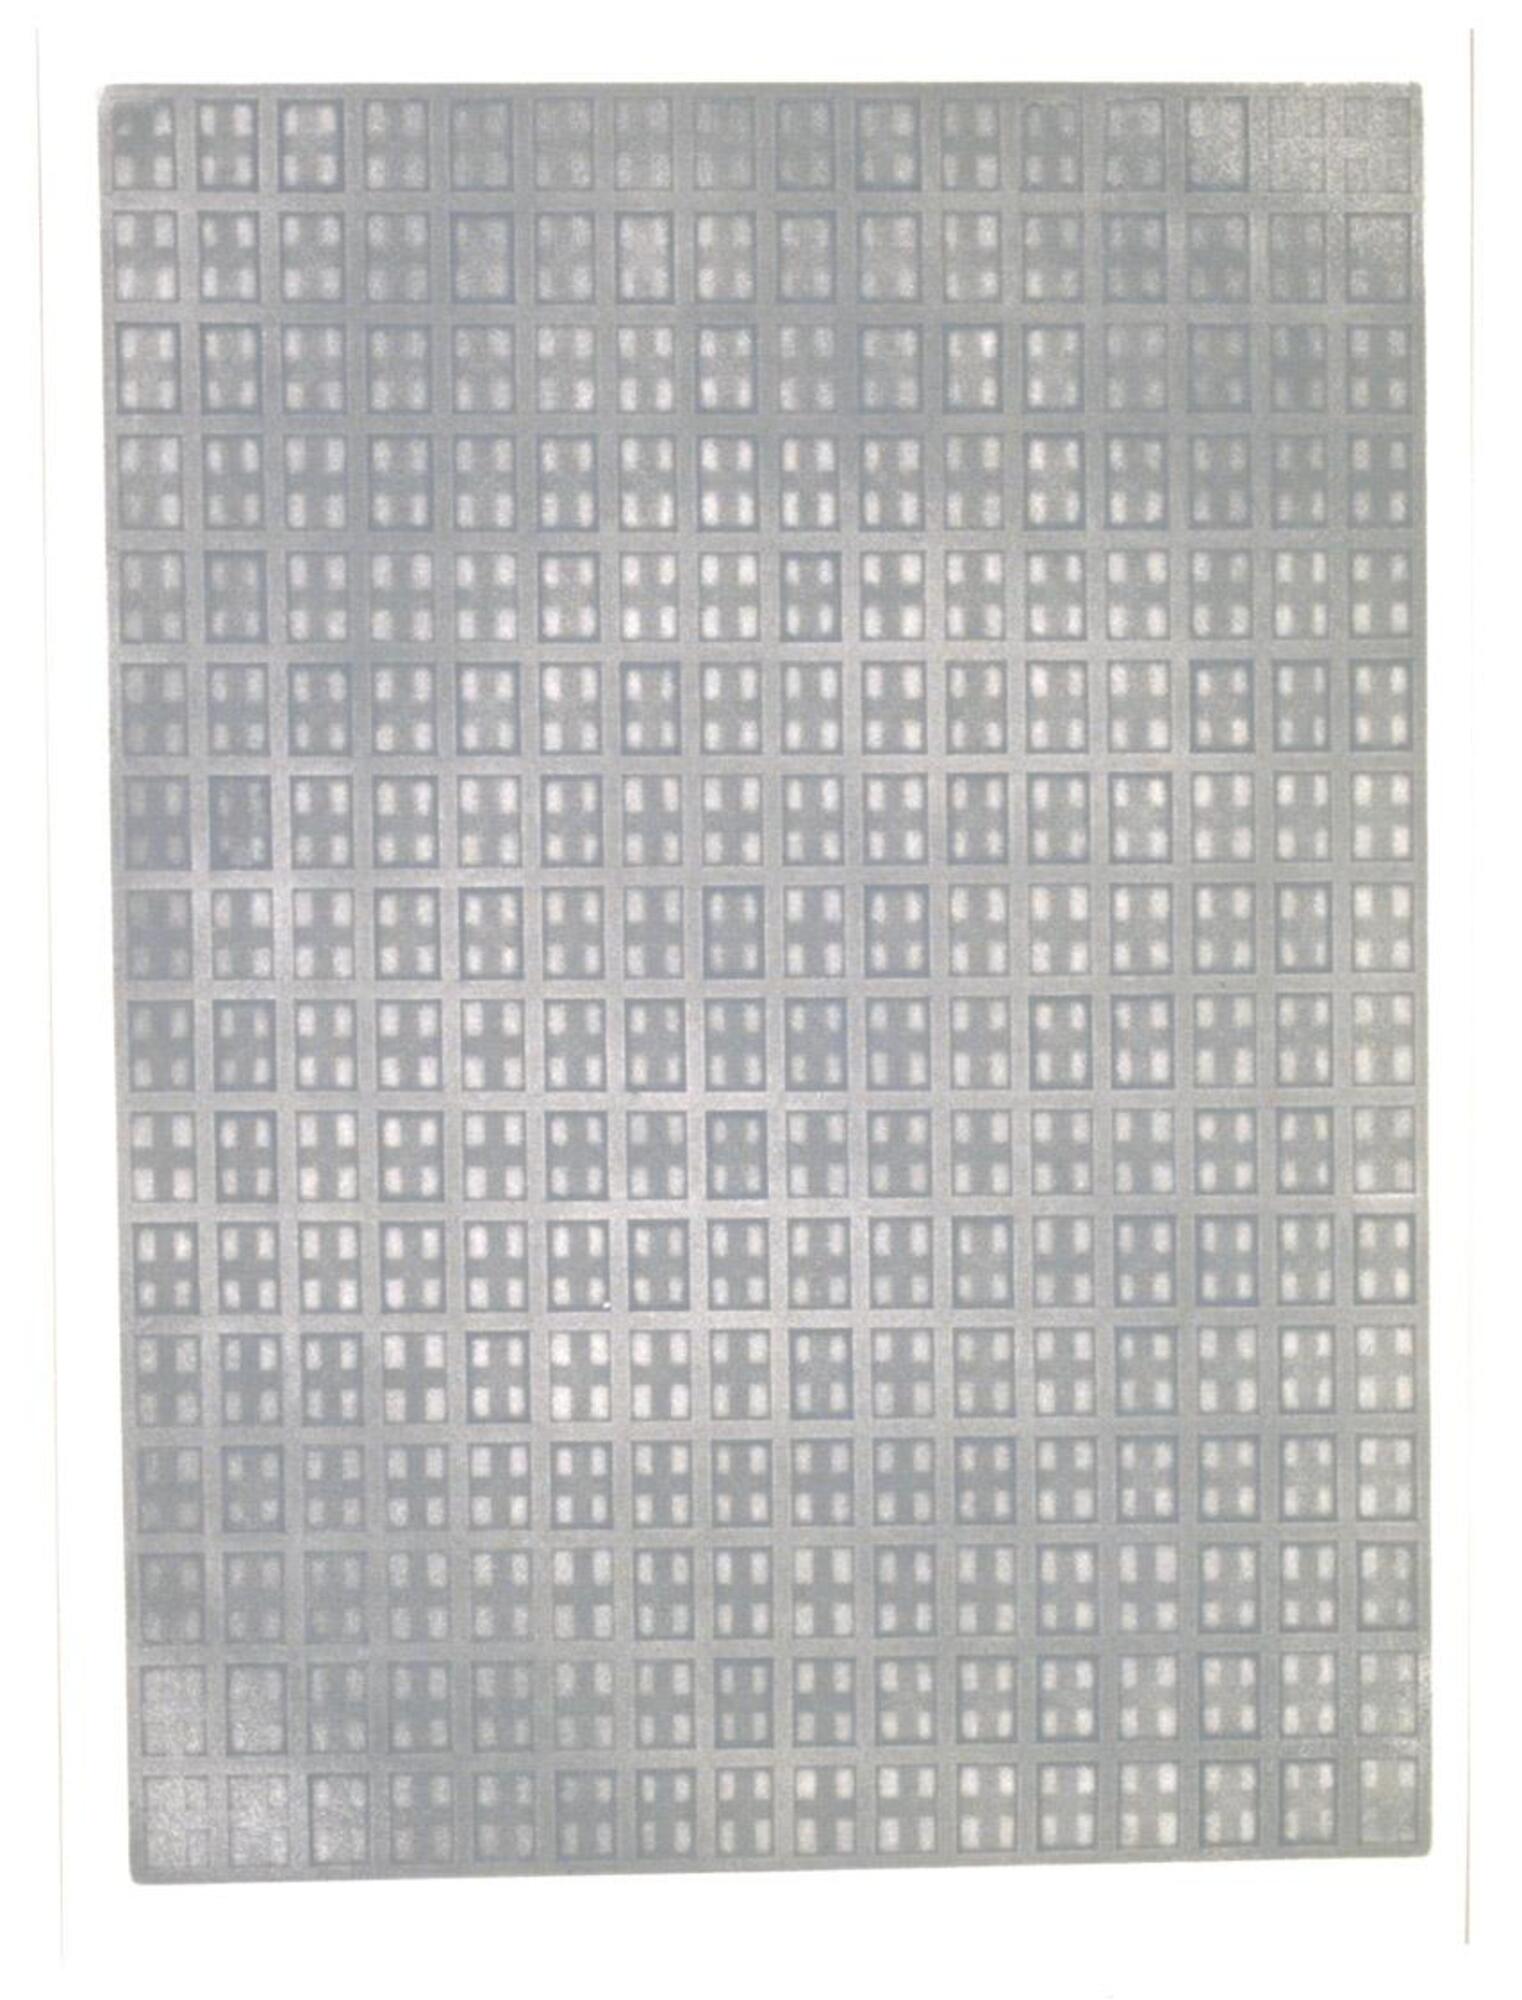 This etching has a grey and white all-over grid pattern. Thicker, light grey lines make up the main grid and individual squares from this pattern are broken into smaller quadrants of small white rectangles. The print uses lighter tones towards the center and outer corners of the work. Darker grey tones are used between these areas. The work is printed on ivory wove paper. The print is signed, dated, and numbered (l.r.) "Longo 70 4/45" in pencil. 